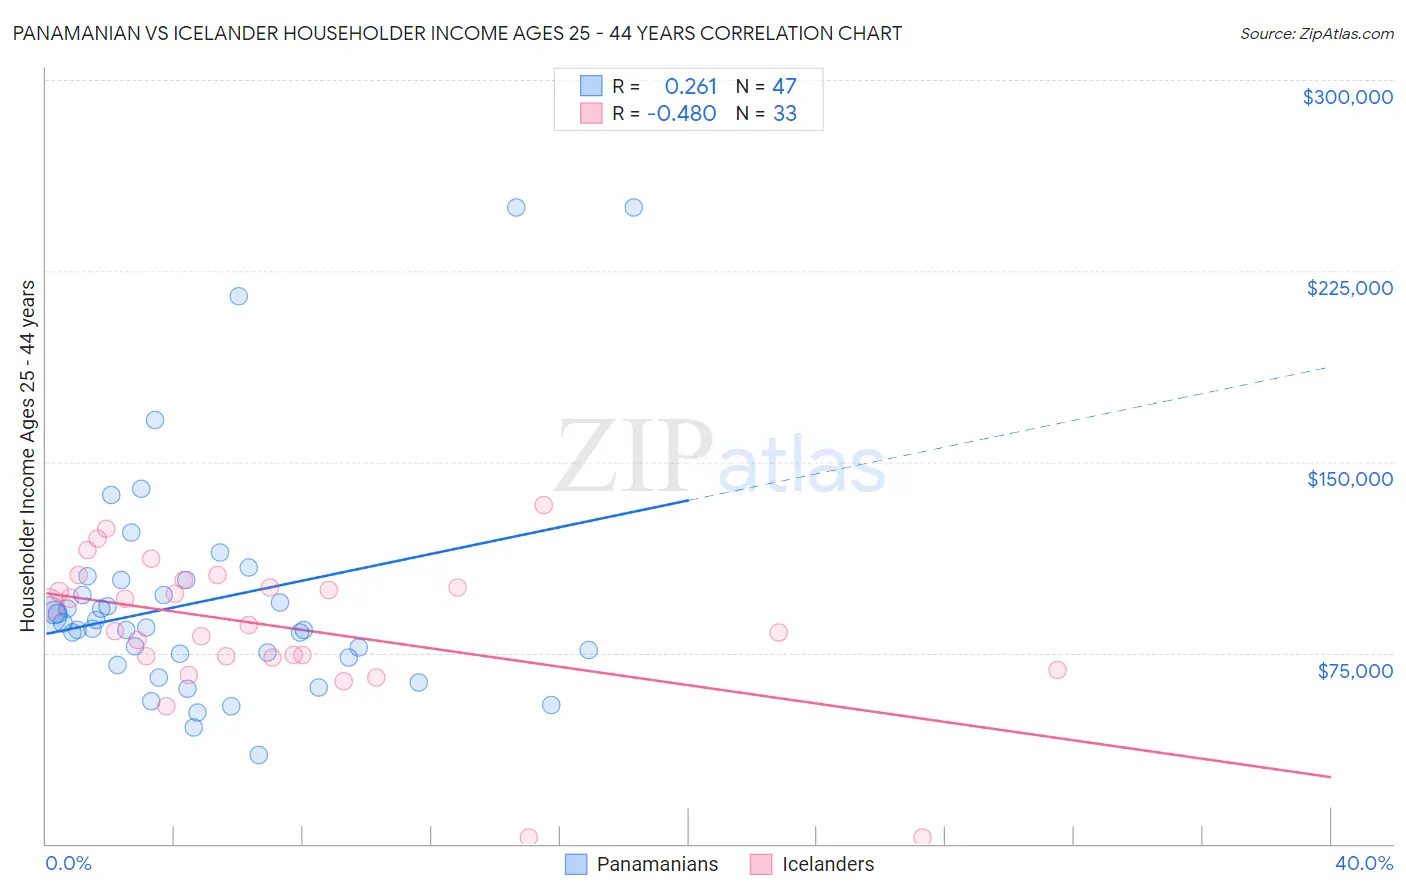 Panamanian vs Icelander Householder Income Ages 25 - 44 years